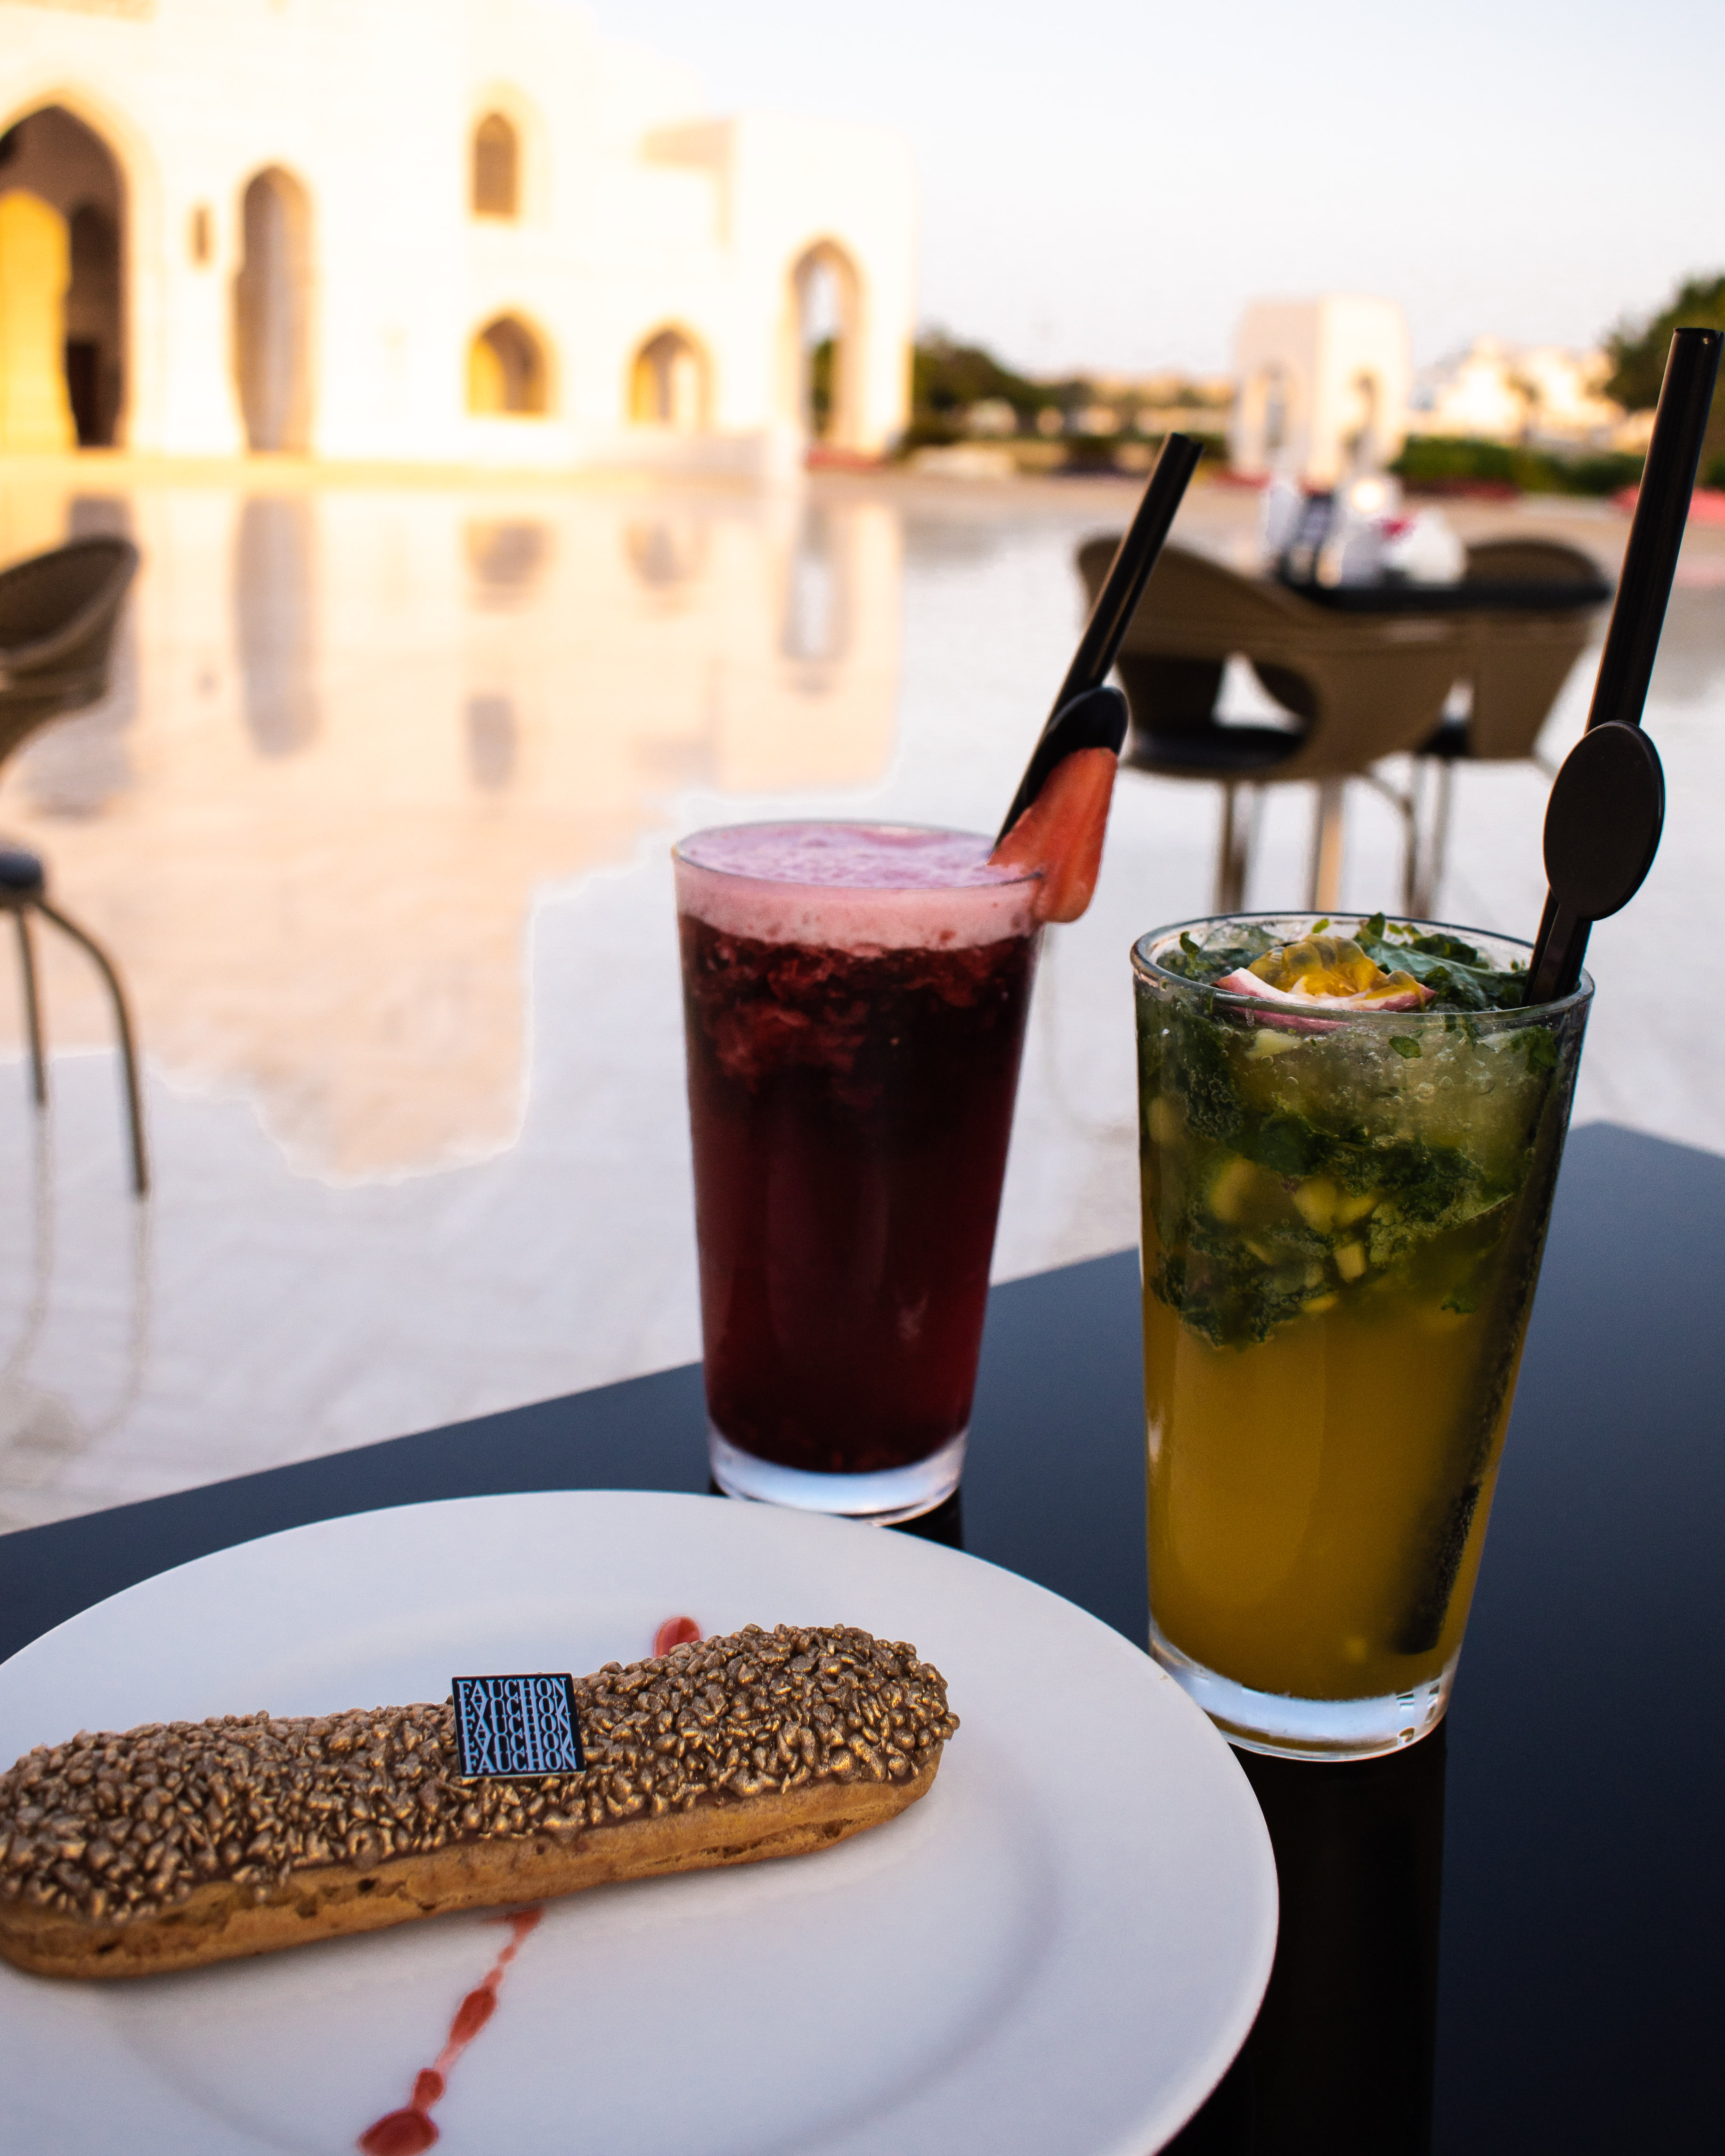 Chocolate eclair and two fruit juices from Fauchon, in front of the Muscat Royal Opera House